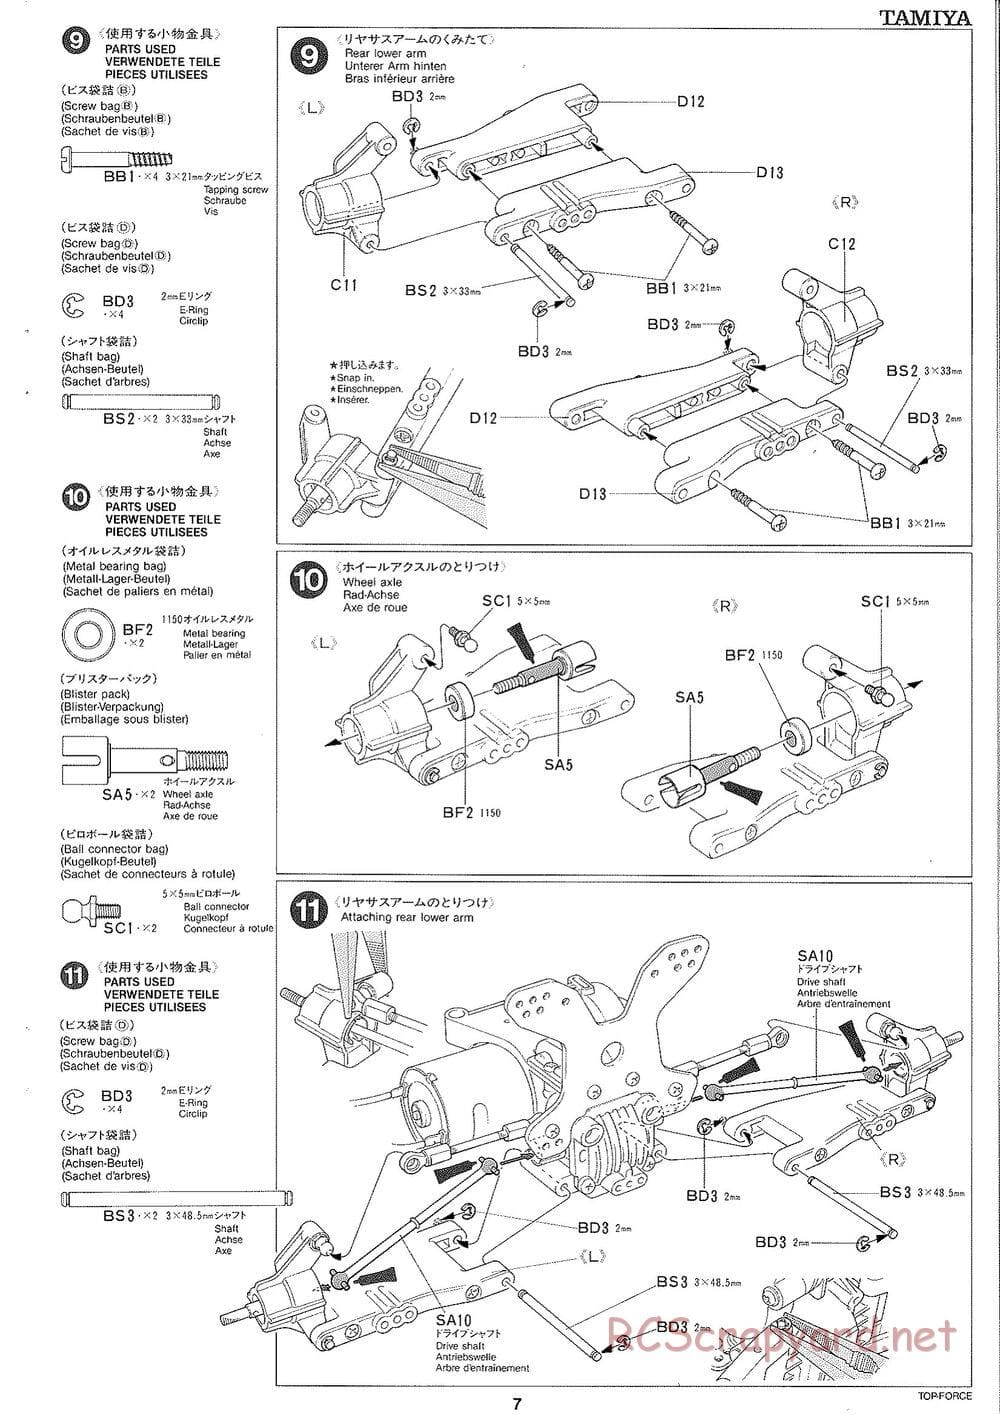 Tamiya - Top Force 2005 - DF-01 Chassis - Manual - Page 7